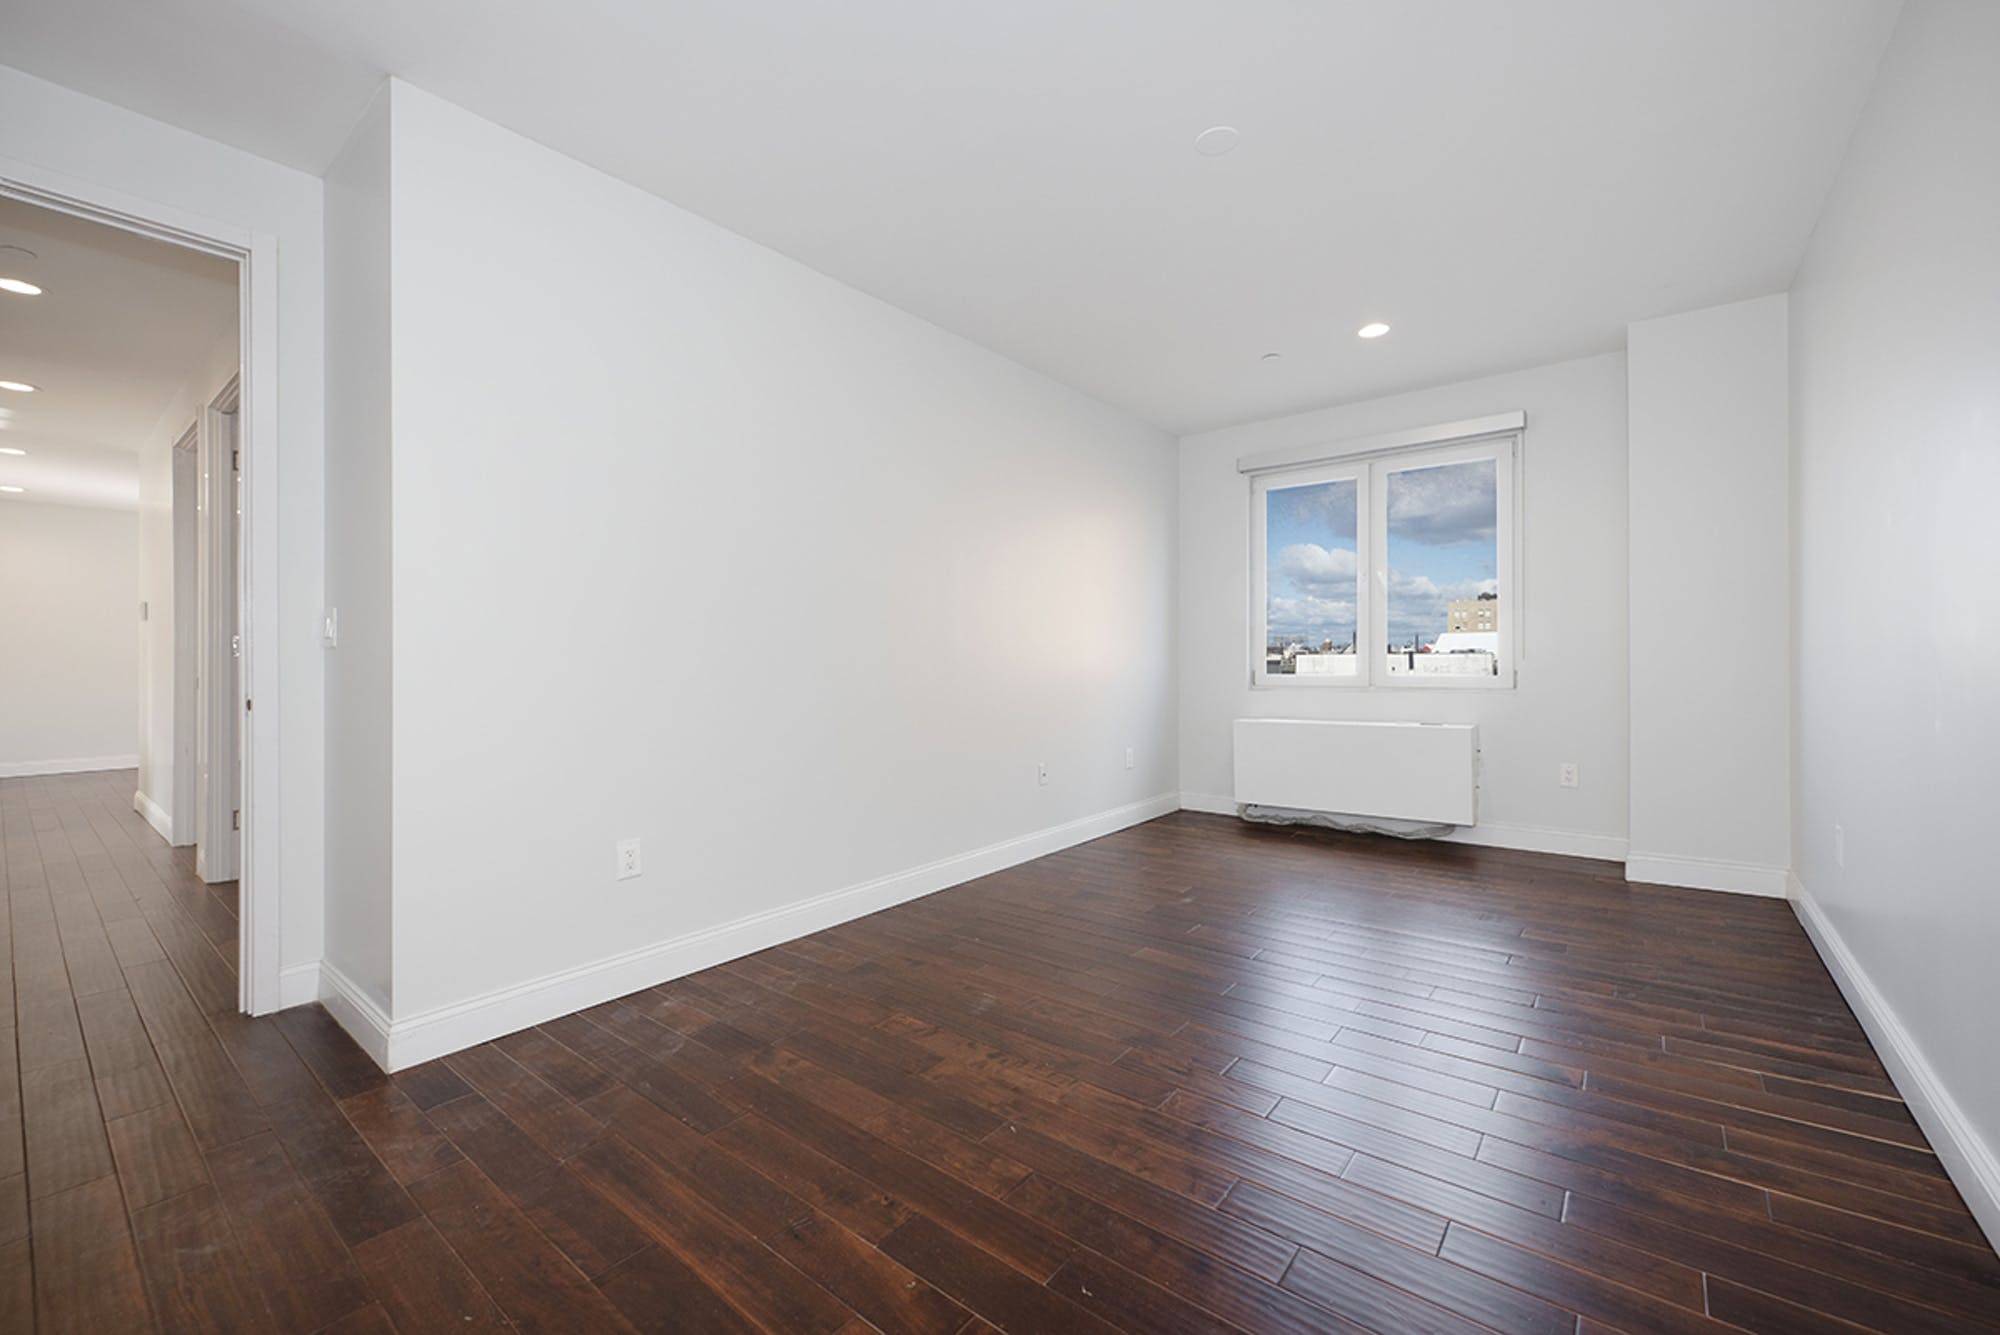 Virtual Tour Available Upon Request One Month Free 3483 net, 3800 gross Welcome to 779 Wyckoff Ave Experience modern luxury in Ridgewood 779 Wyckoff Avenue is a beautifully restored five ...